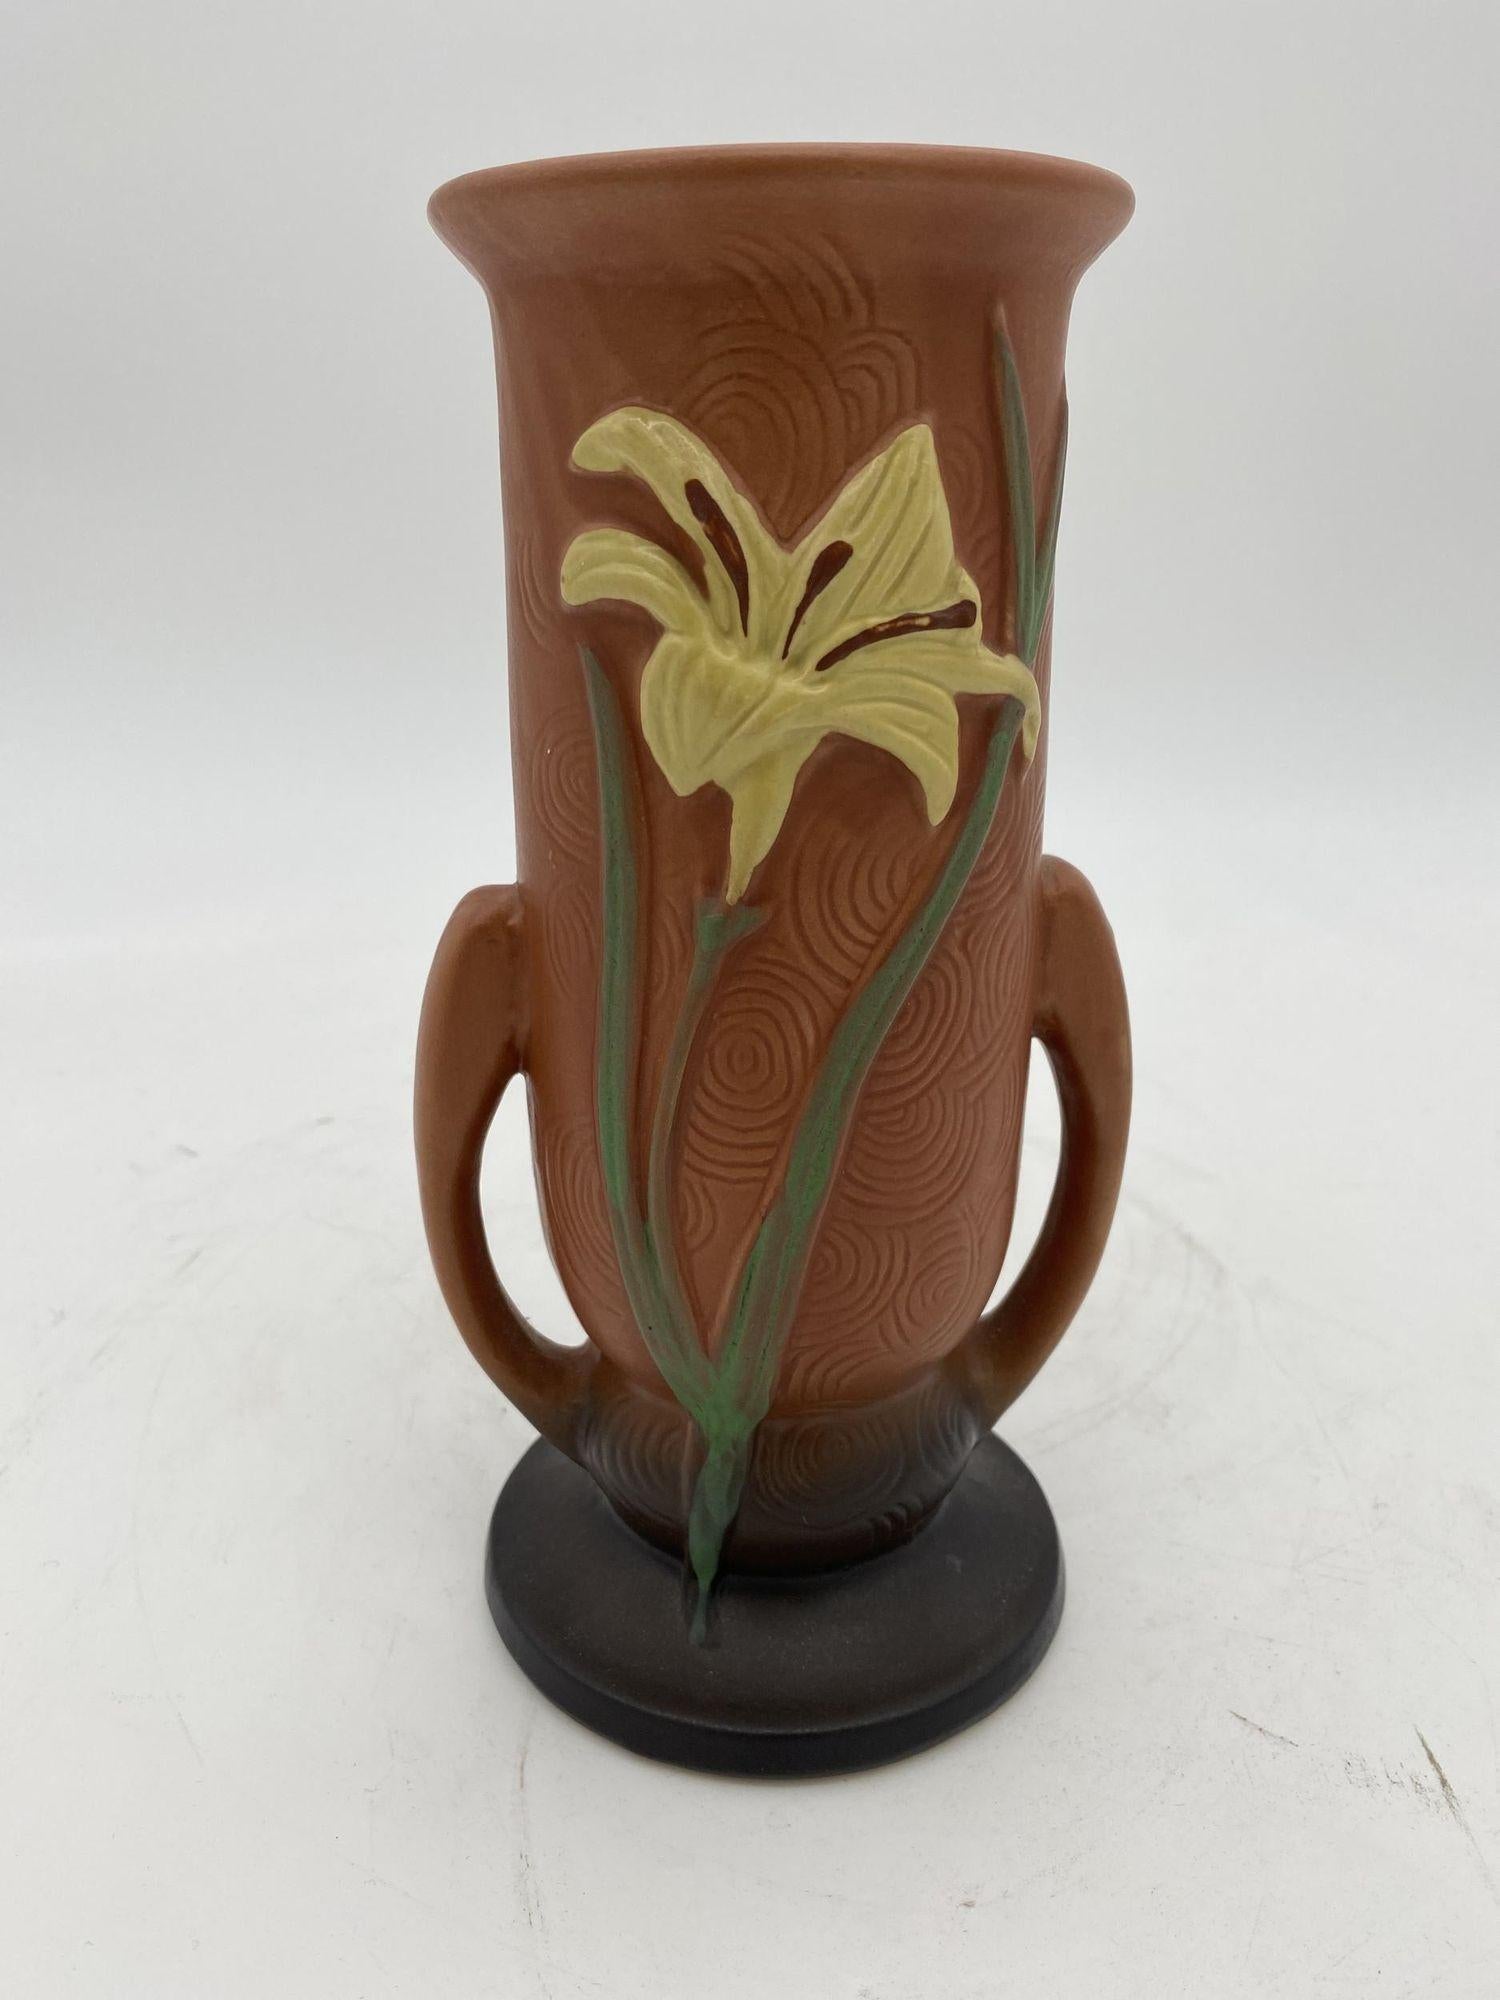 Vintage 1946 Art Nouveau Zephyr Lily brown art pottery flower vase by Roseville number 133-8. The vase features a flute shape and has a relief of a yellow lily with a black base that fades into brown and gradually fades into pinkish salmon